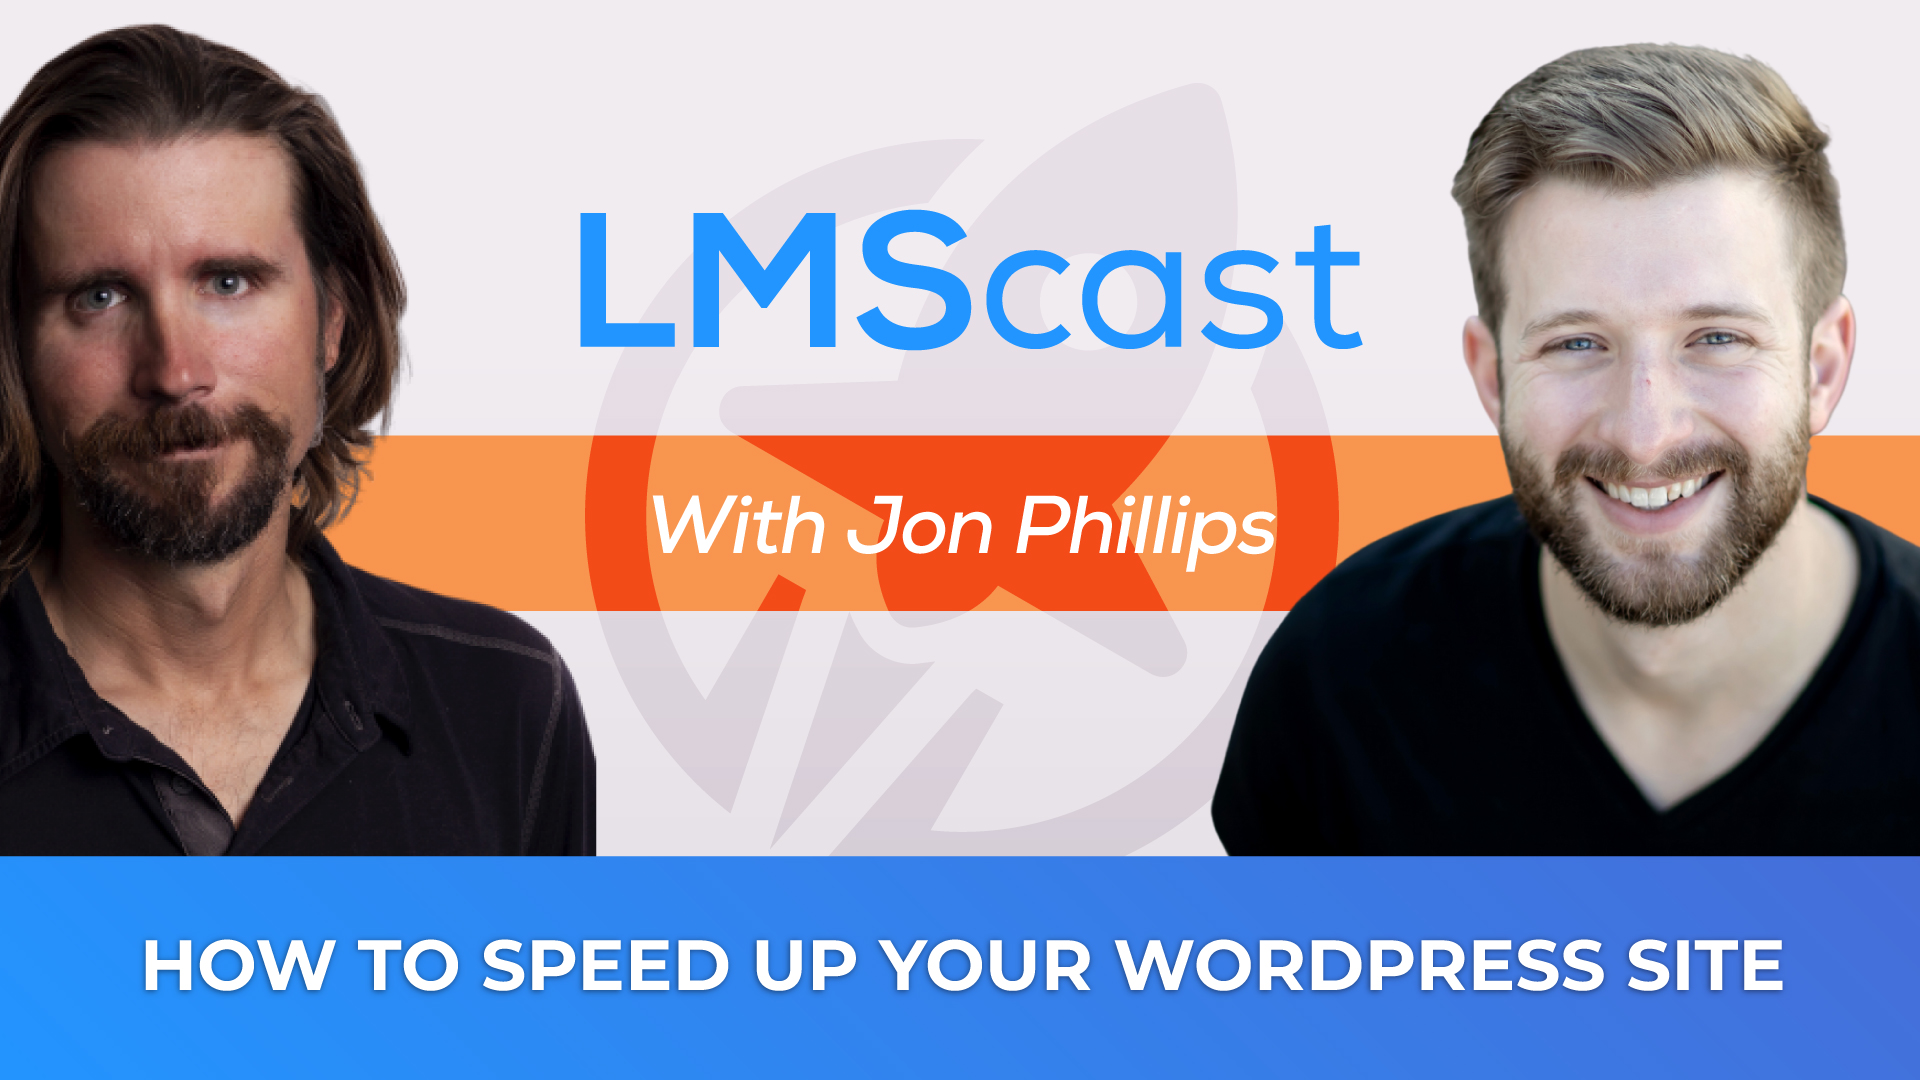 Website Speed Expert and Course Creator Jon Phillips Reveals How to Speed Up Your WordPress Site